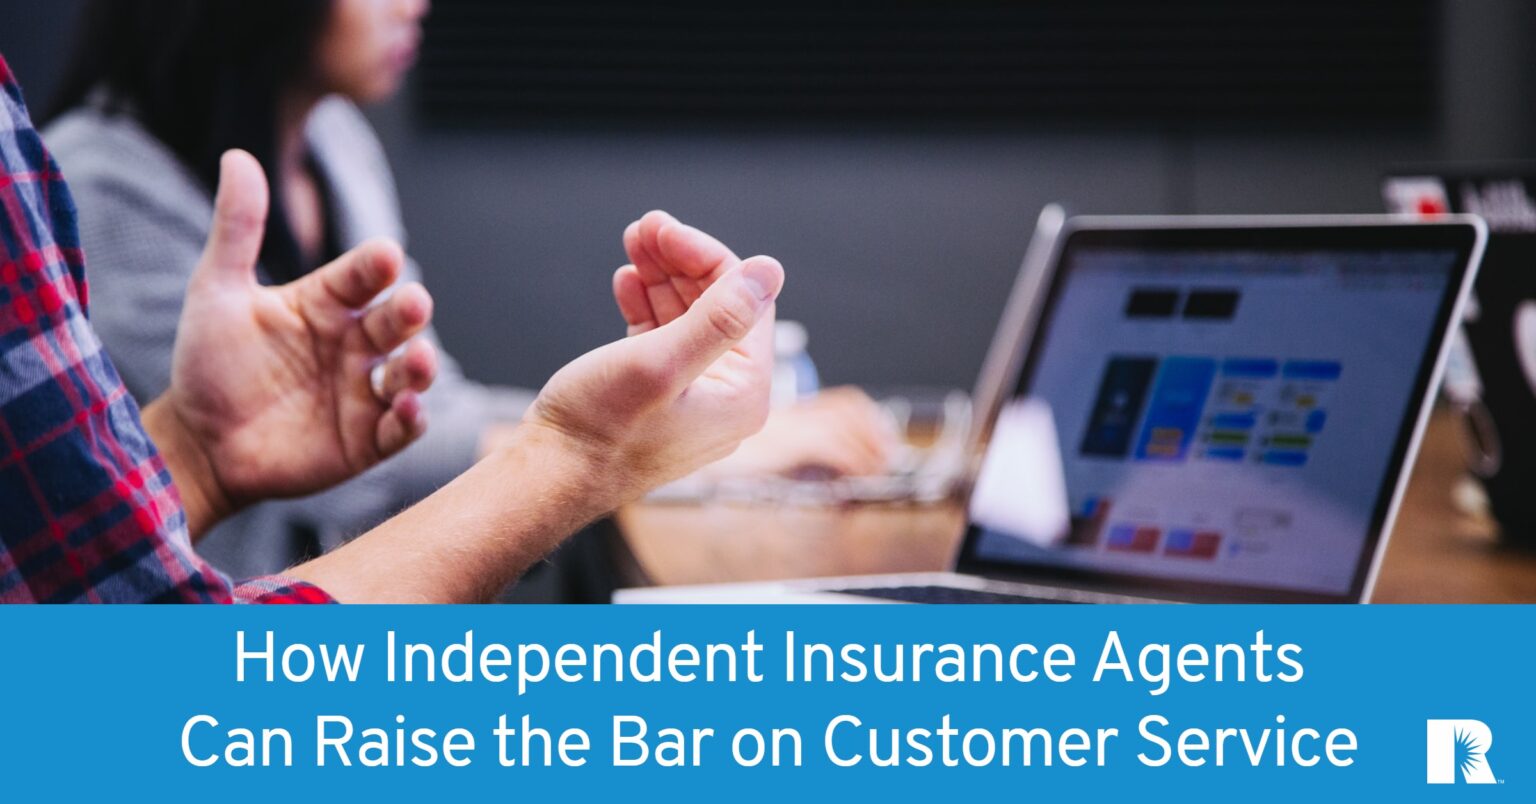 How the Independent Insurance Agents Can Raise their Bar on Customer Service